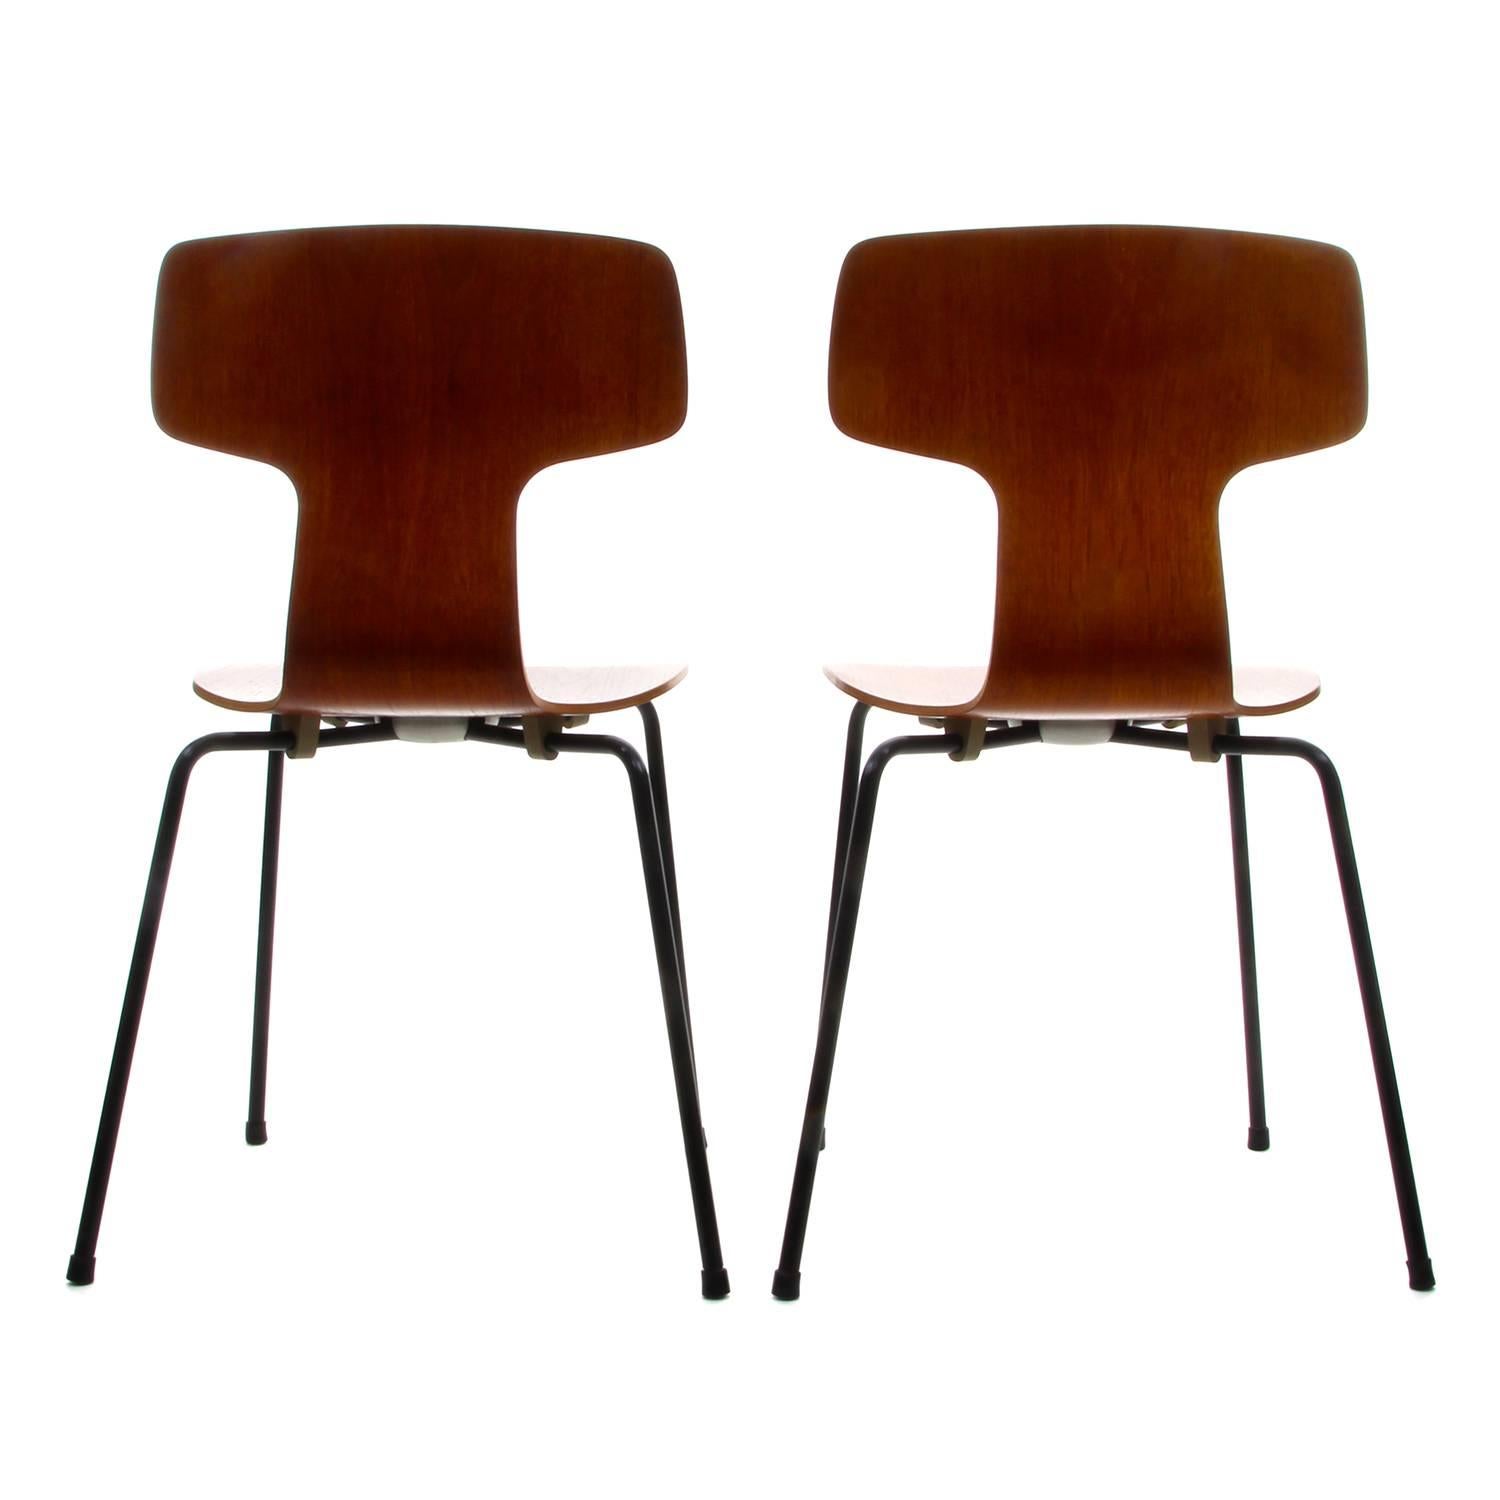 Two Teak T-Chairs, Model 3103 Dining Chairs by Arne Jacobsen, Fritz Hansen, 1955 In Excellent Condition For Sale In Frederiksberg, DK